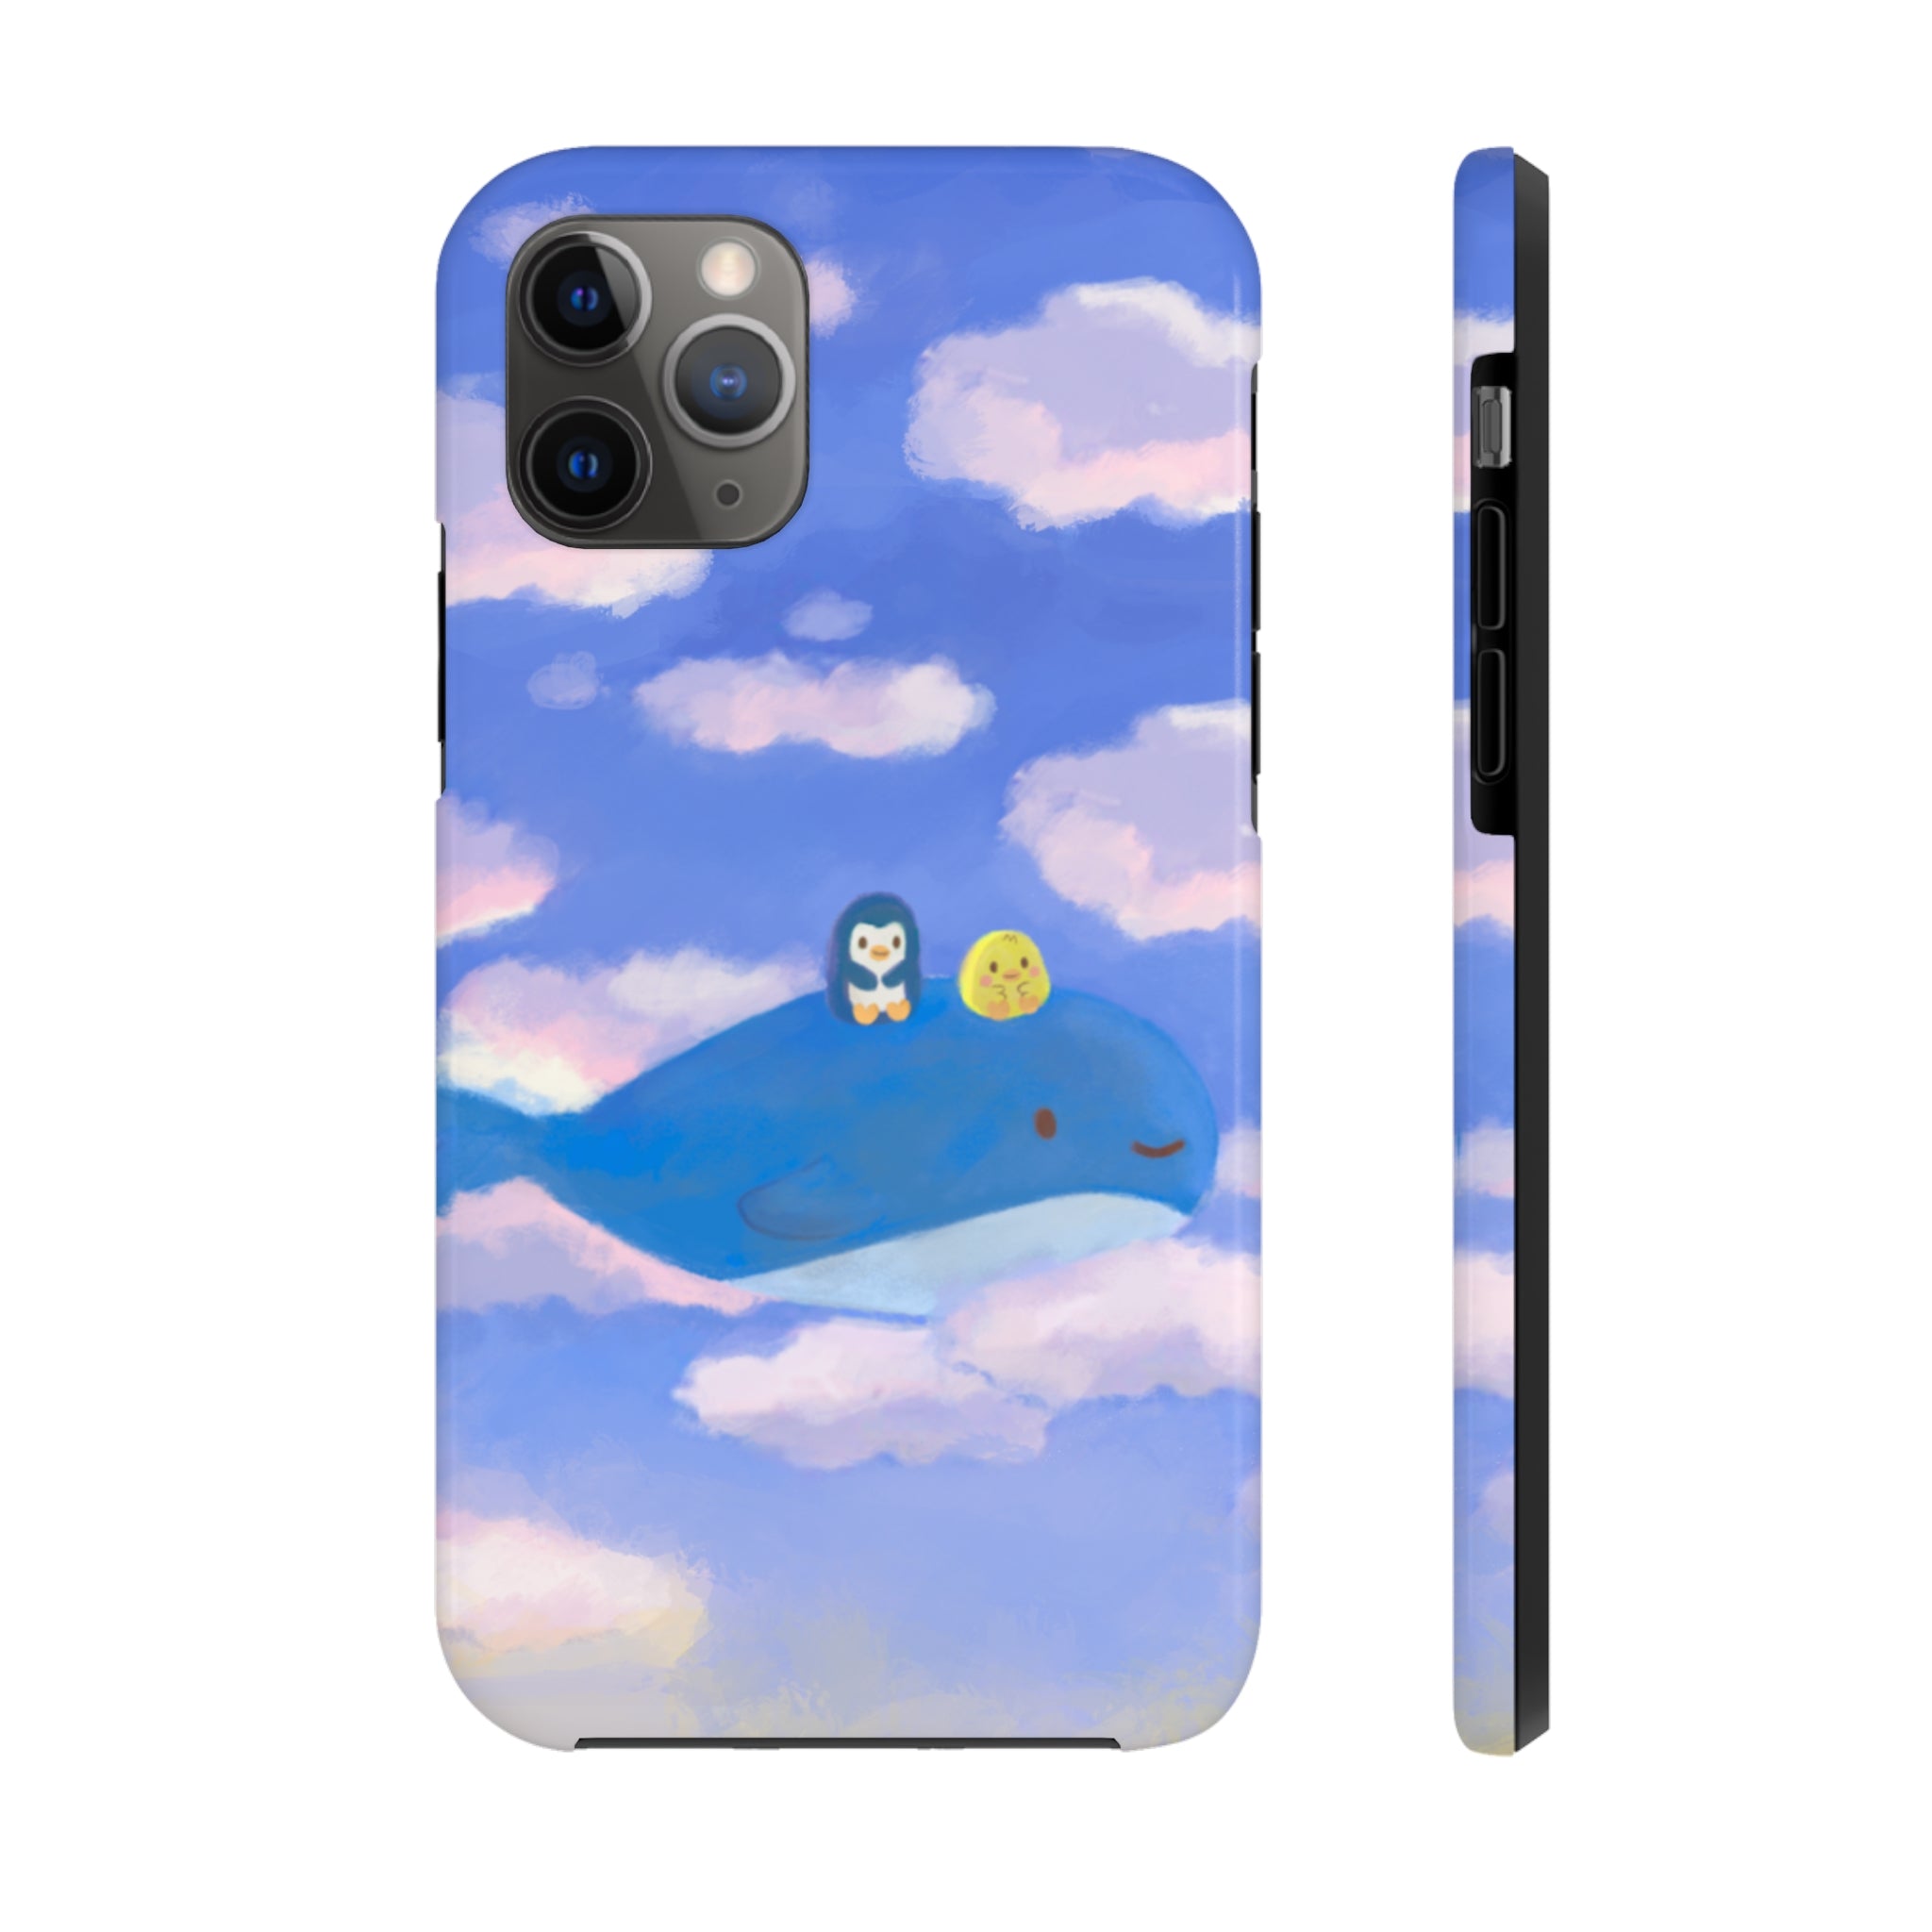 Sky Whale iPhone Case